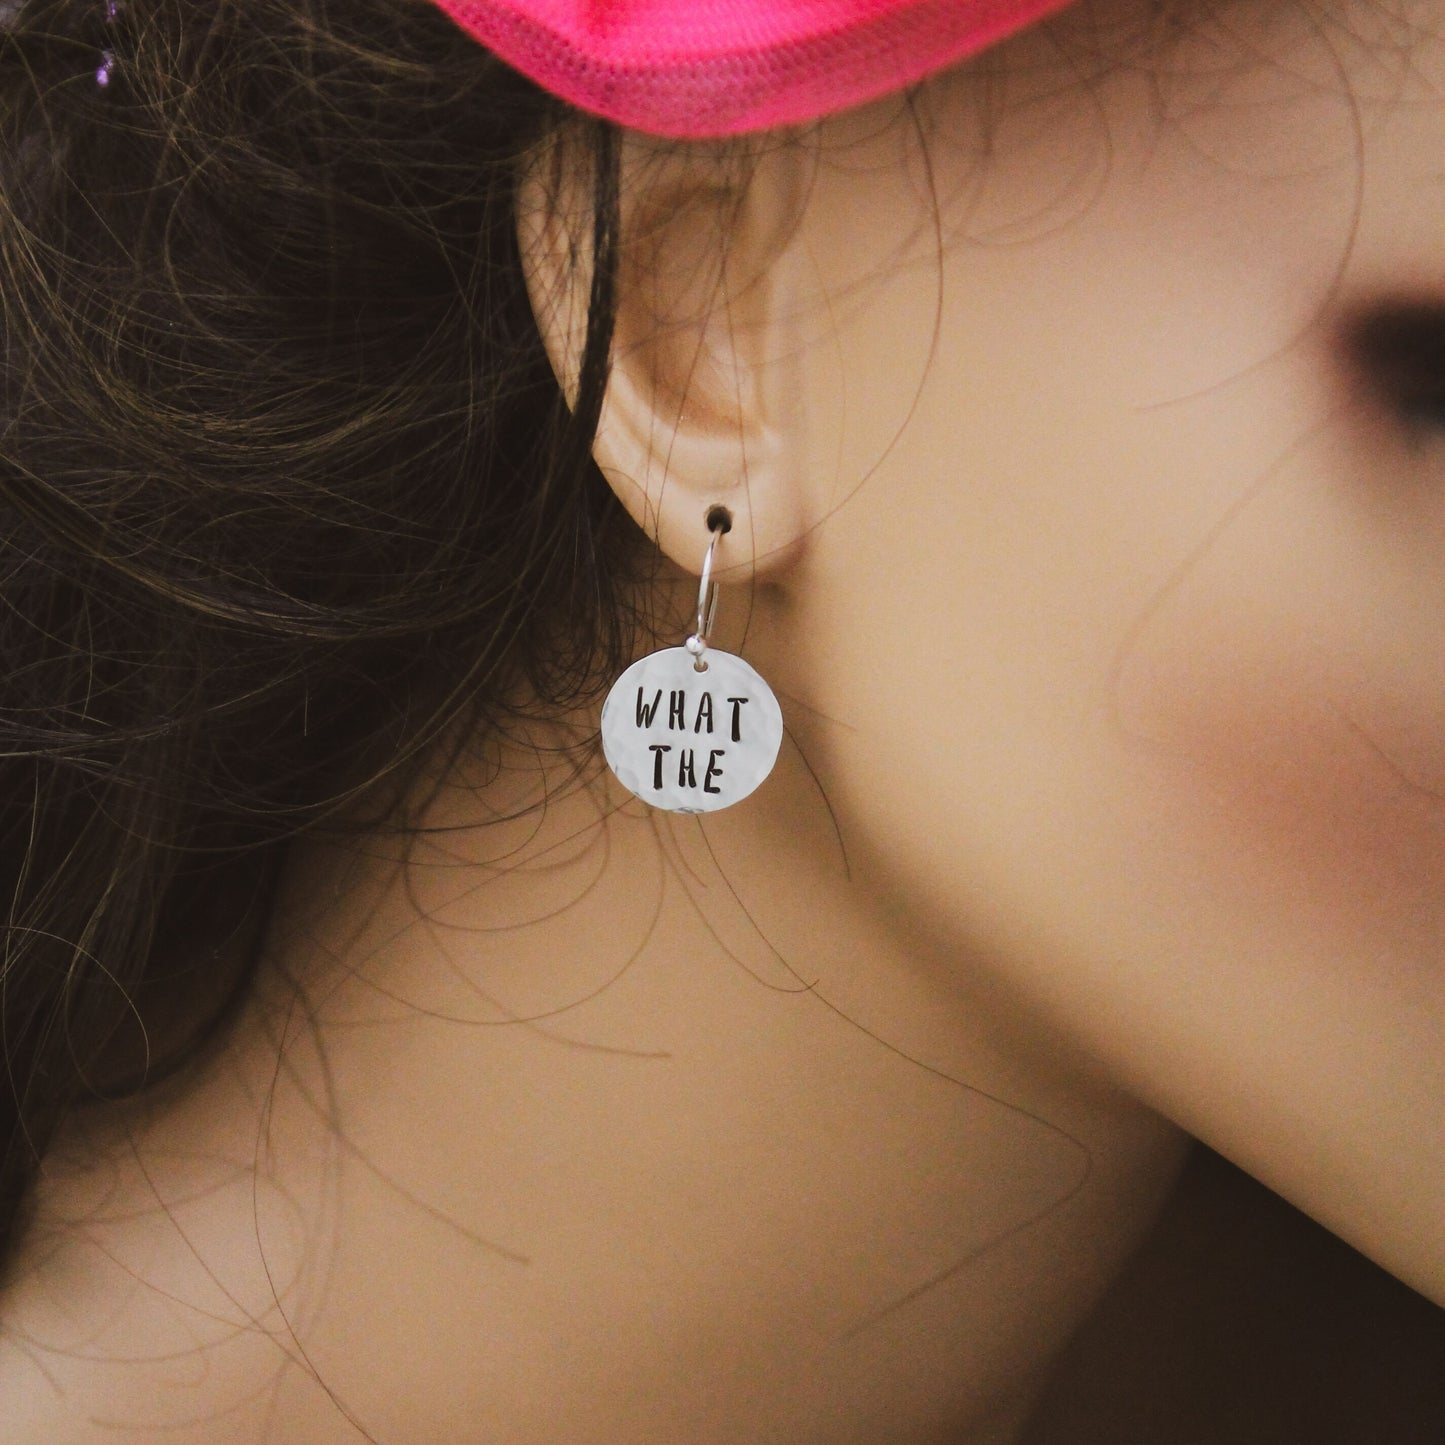 What the Actual Fuck Sterling Silver Earrings, What the Fuck Jewelry, Hand Stamped Personalized Earrings, Explicit Curse Word Jewelry WTF